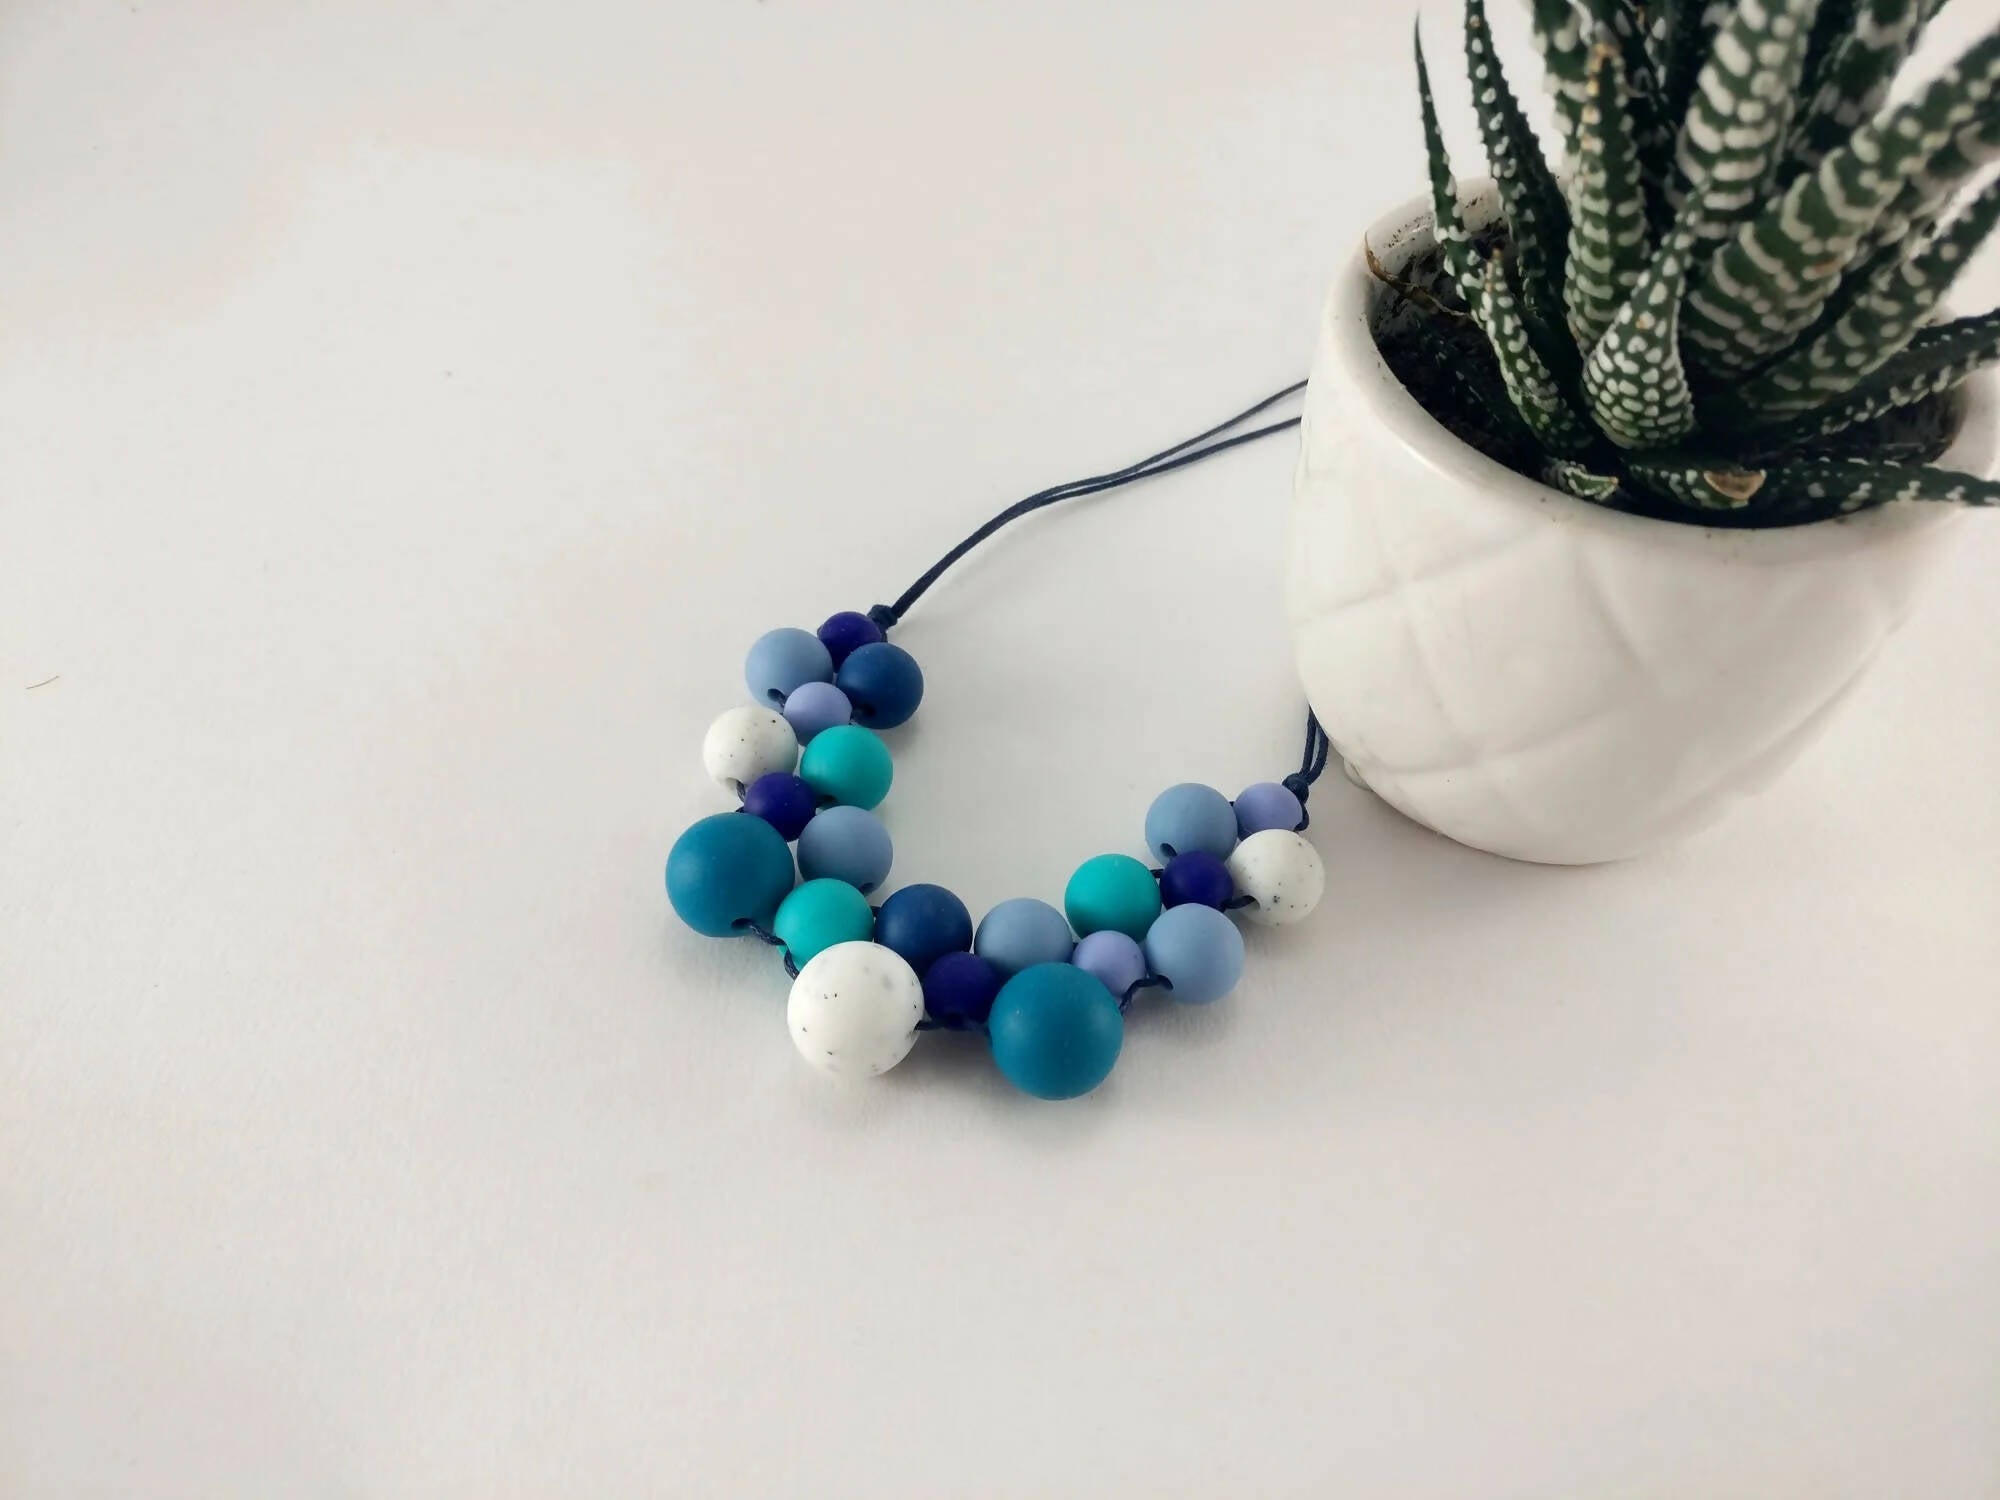 Blue Speckled Silicone Necklace | Geometric Necklace | Statement Necklace